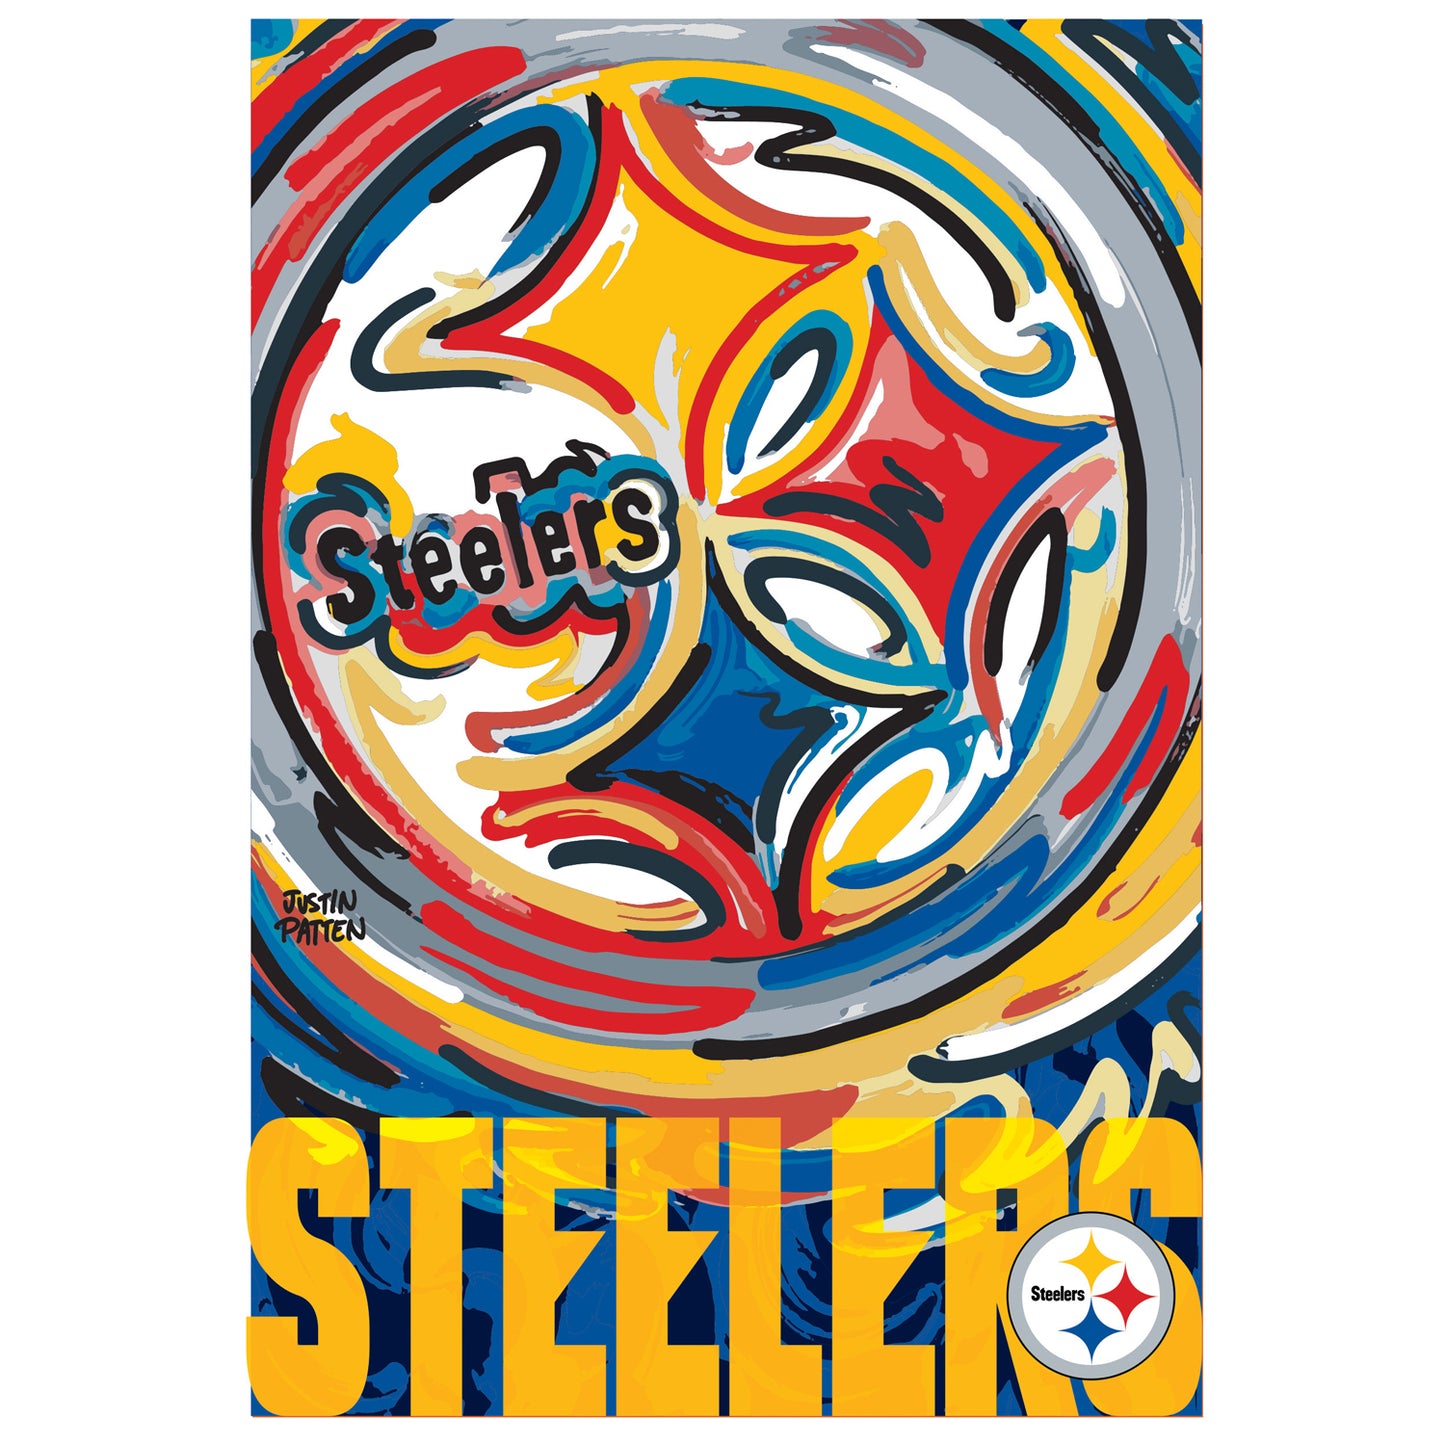 Pittsburgh Steelers House Flag 29" x 43" by Justin Patten